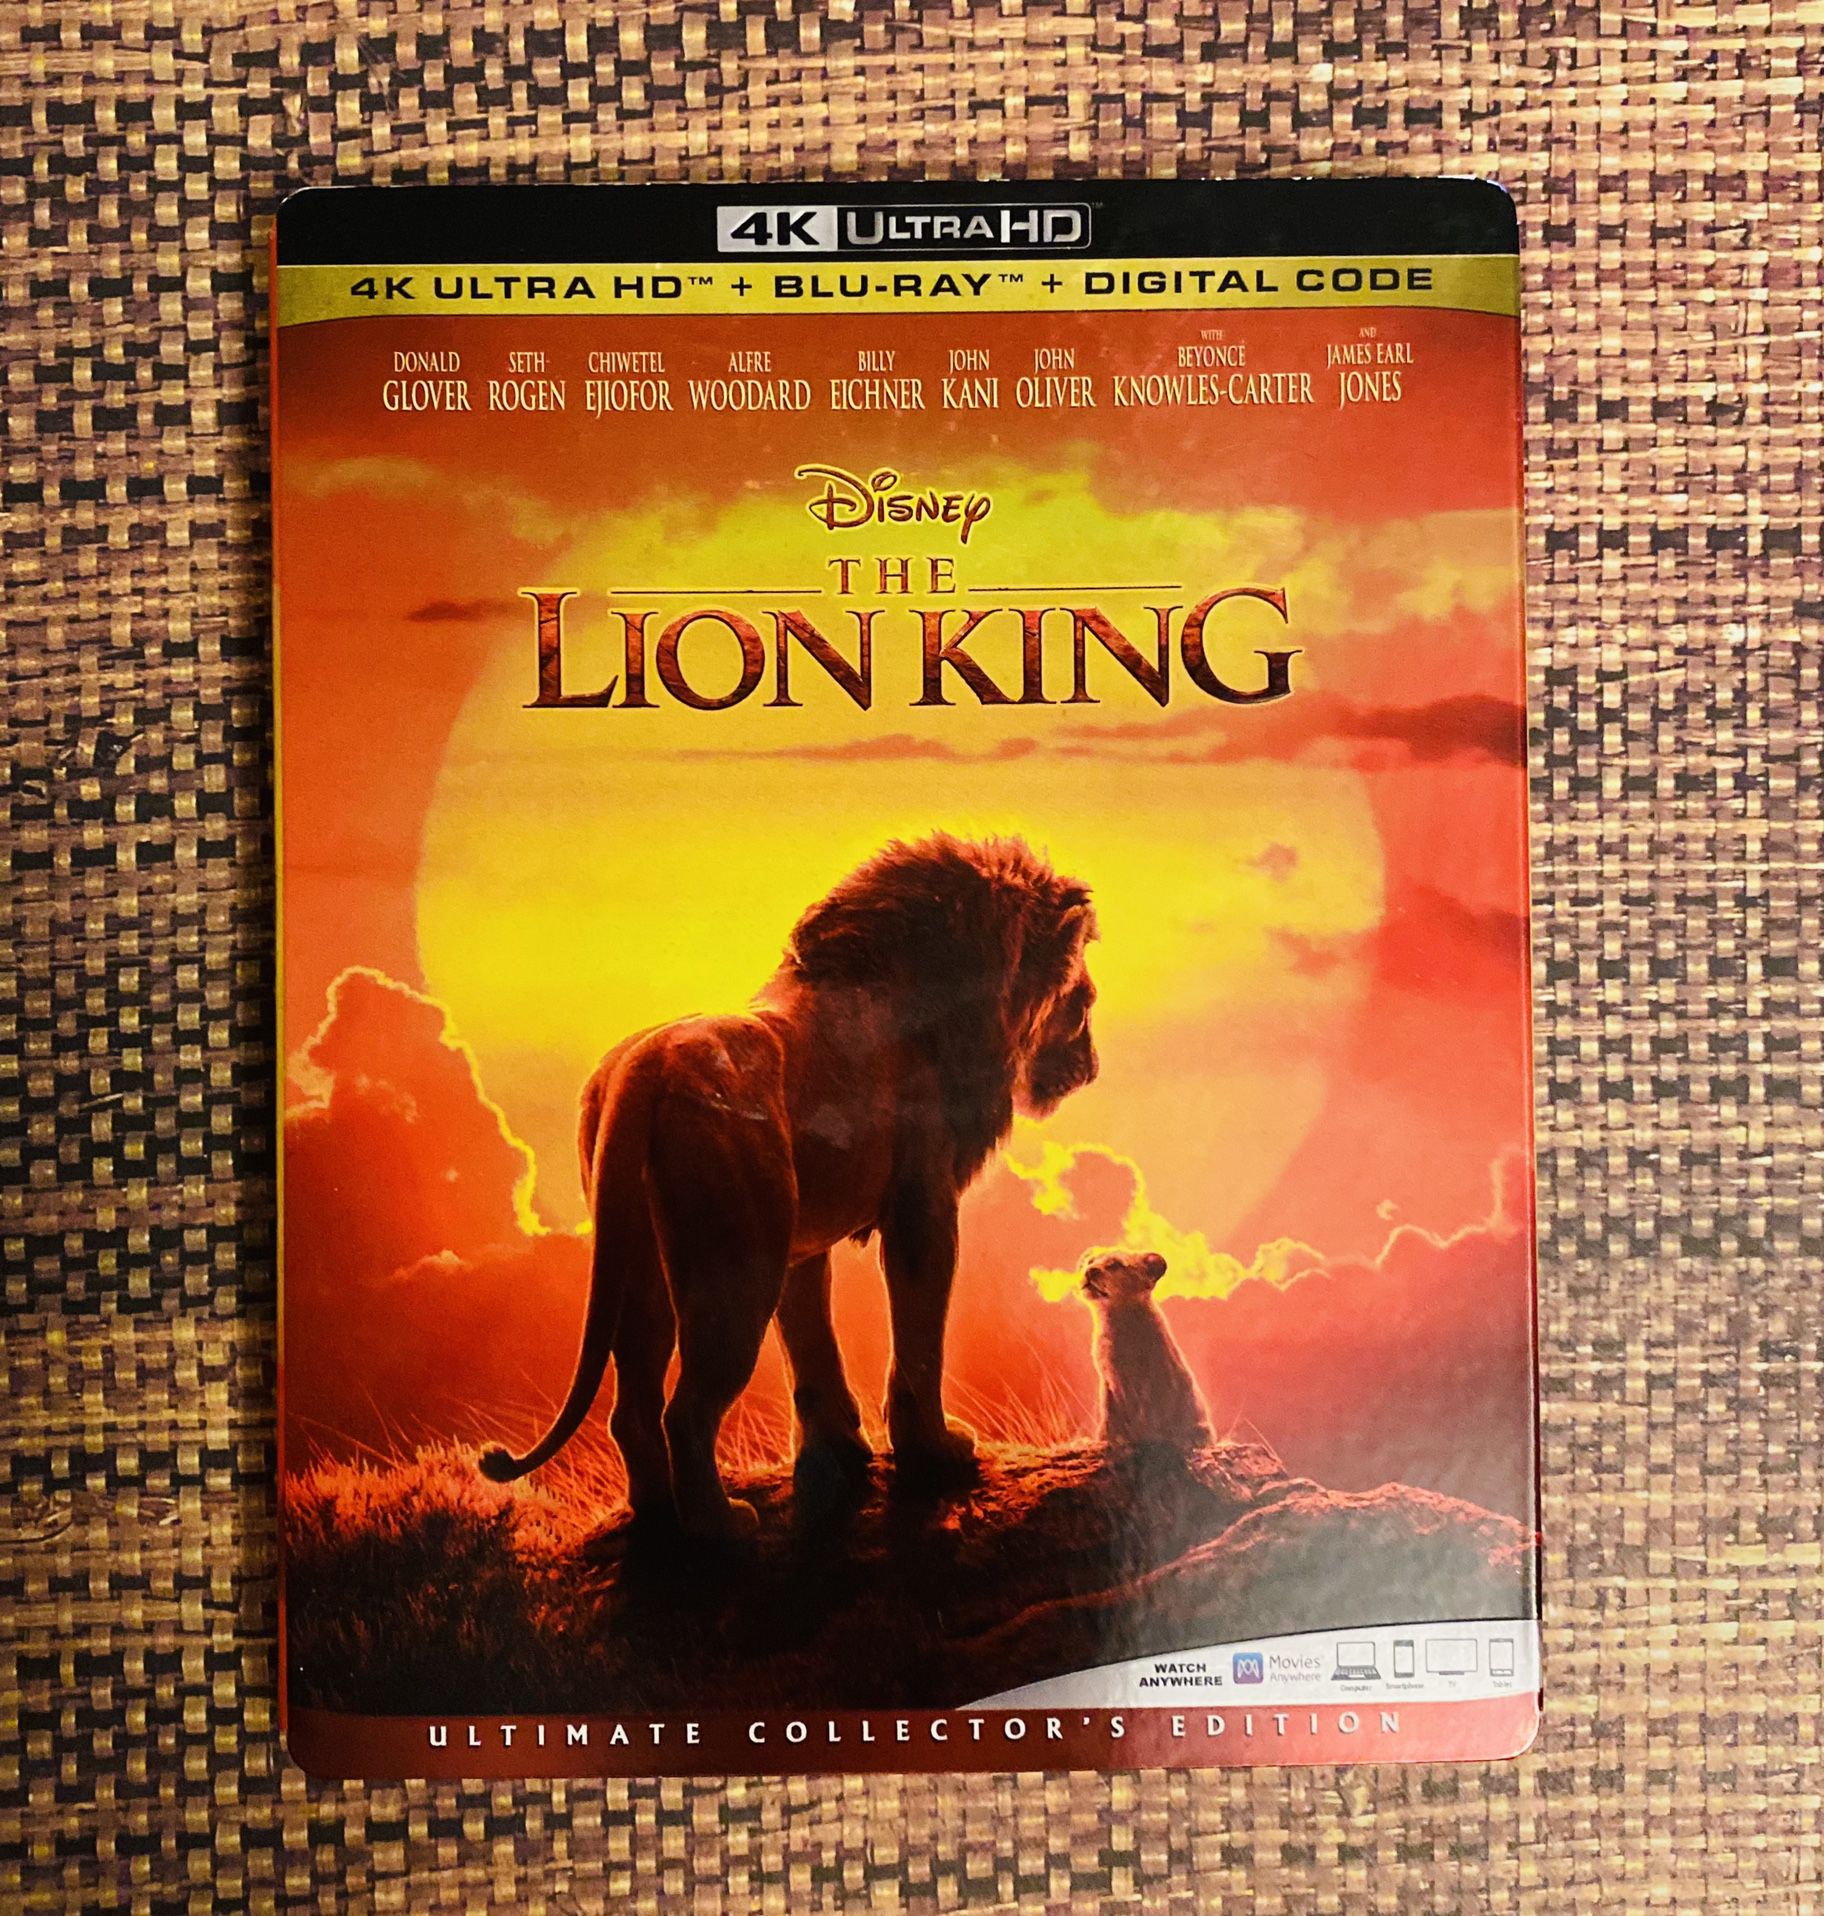 The Lion King 4K Ultra HD Live Action